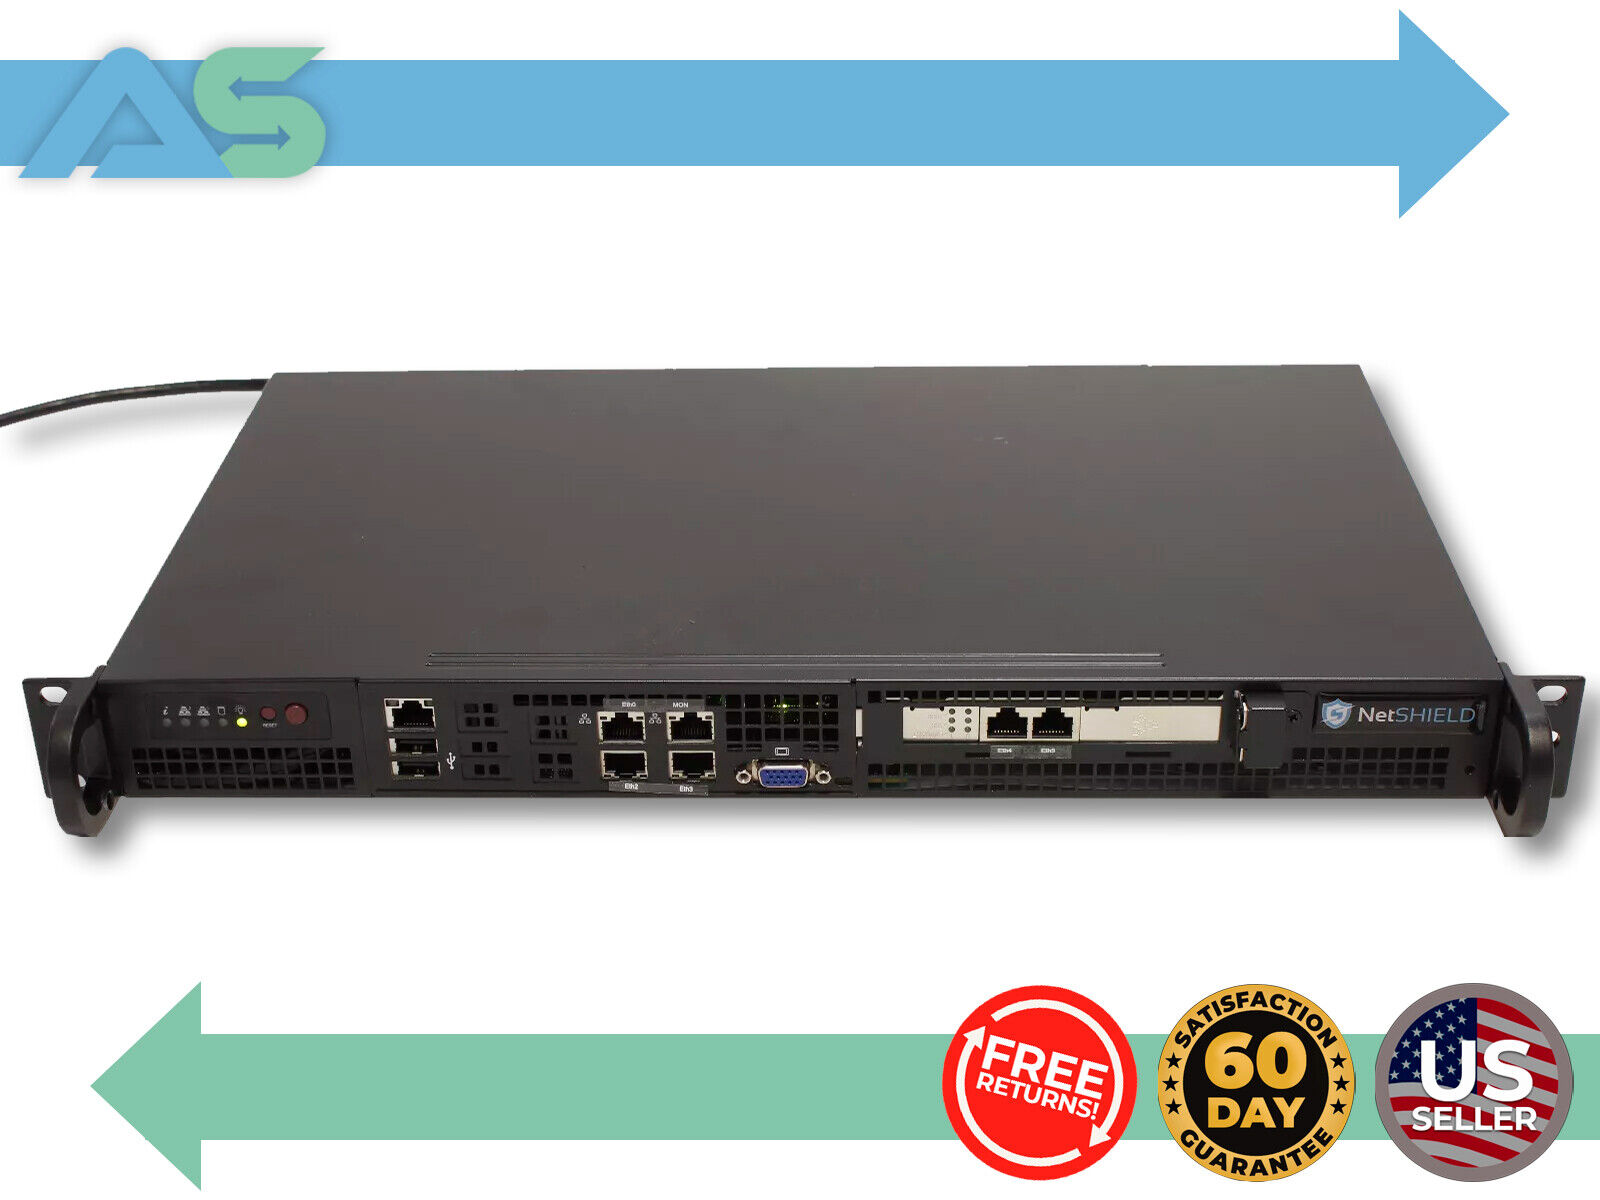 SuperMicro SuperServer 1U RackMountable 505-2 SYS-5019A-FTN4 16GB Ram No HDD